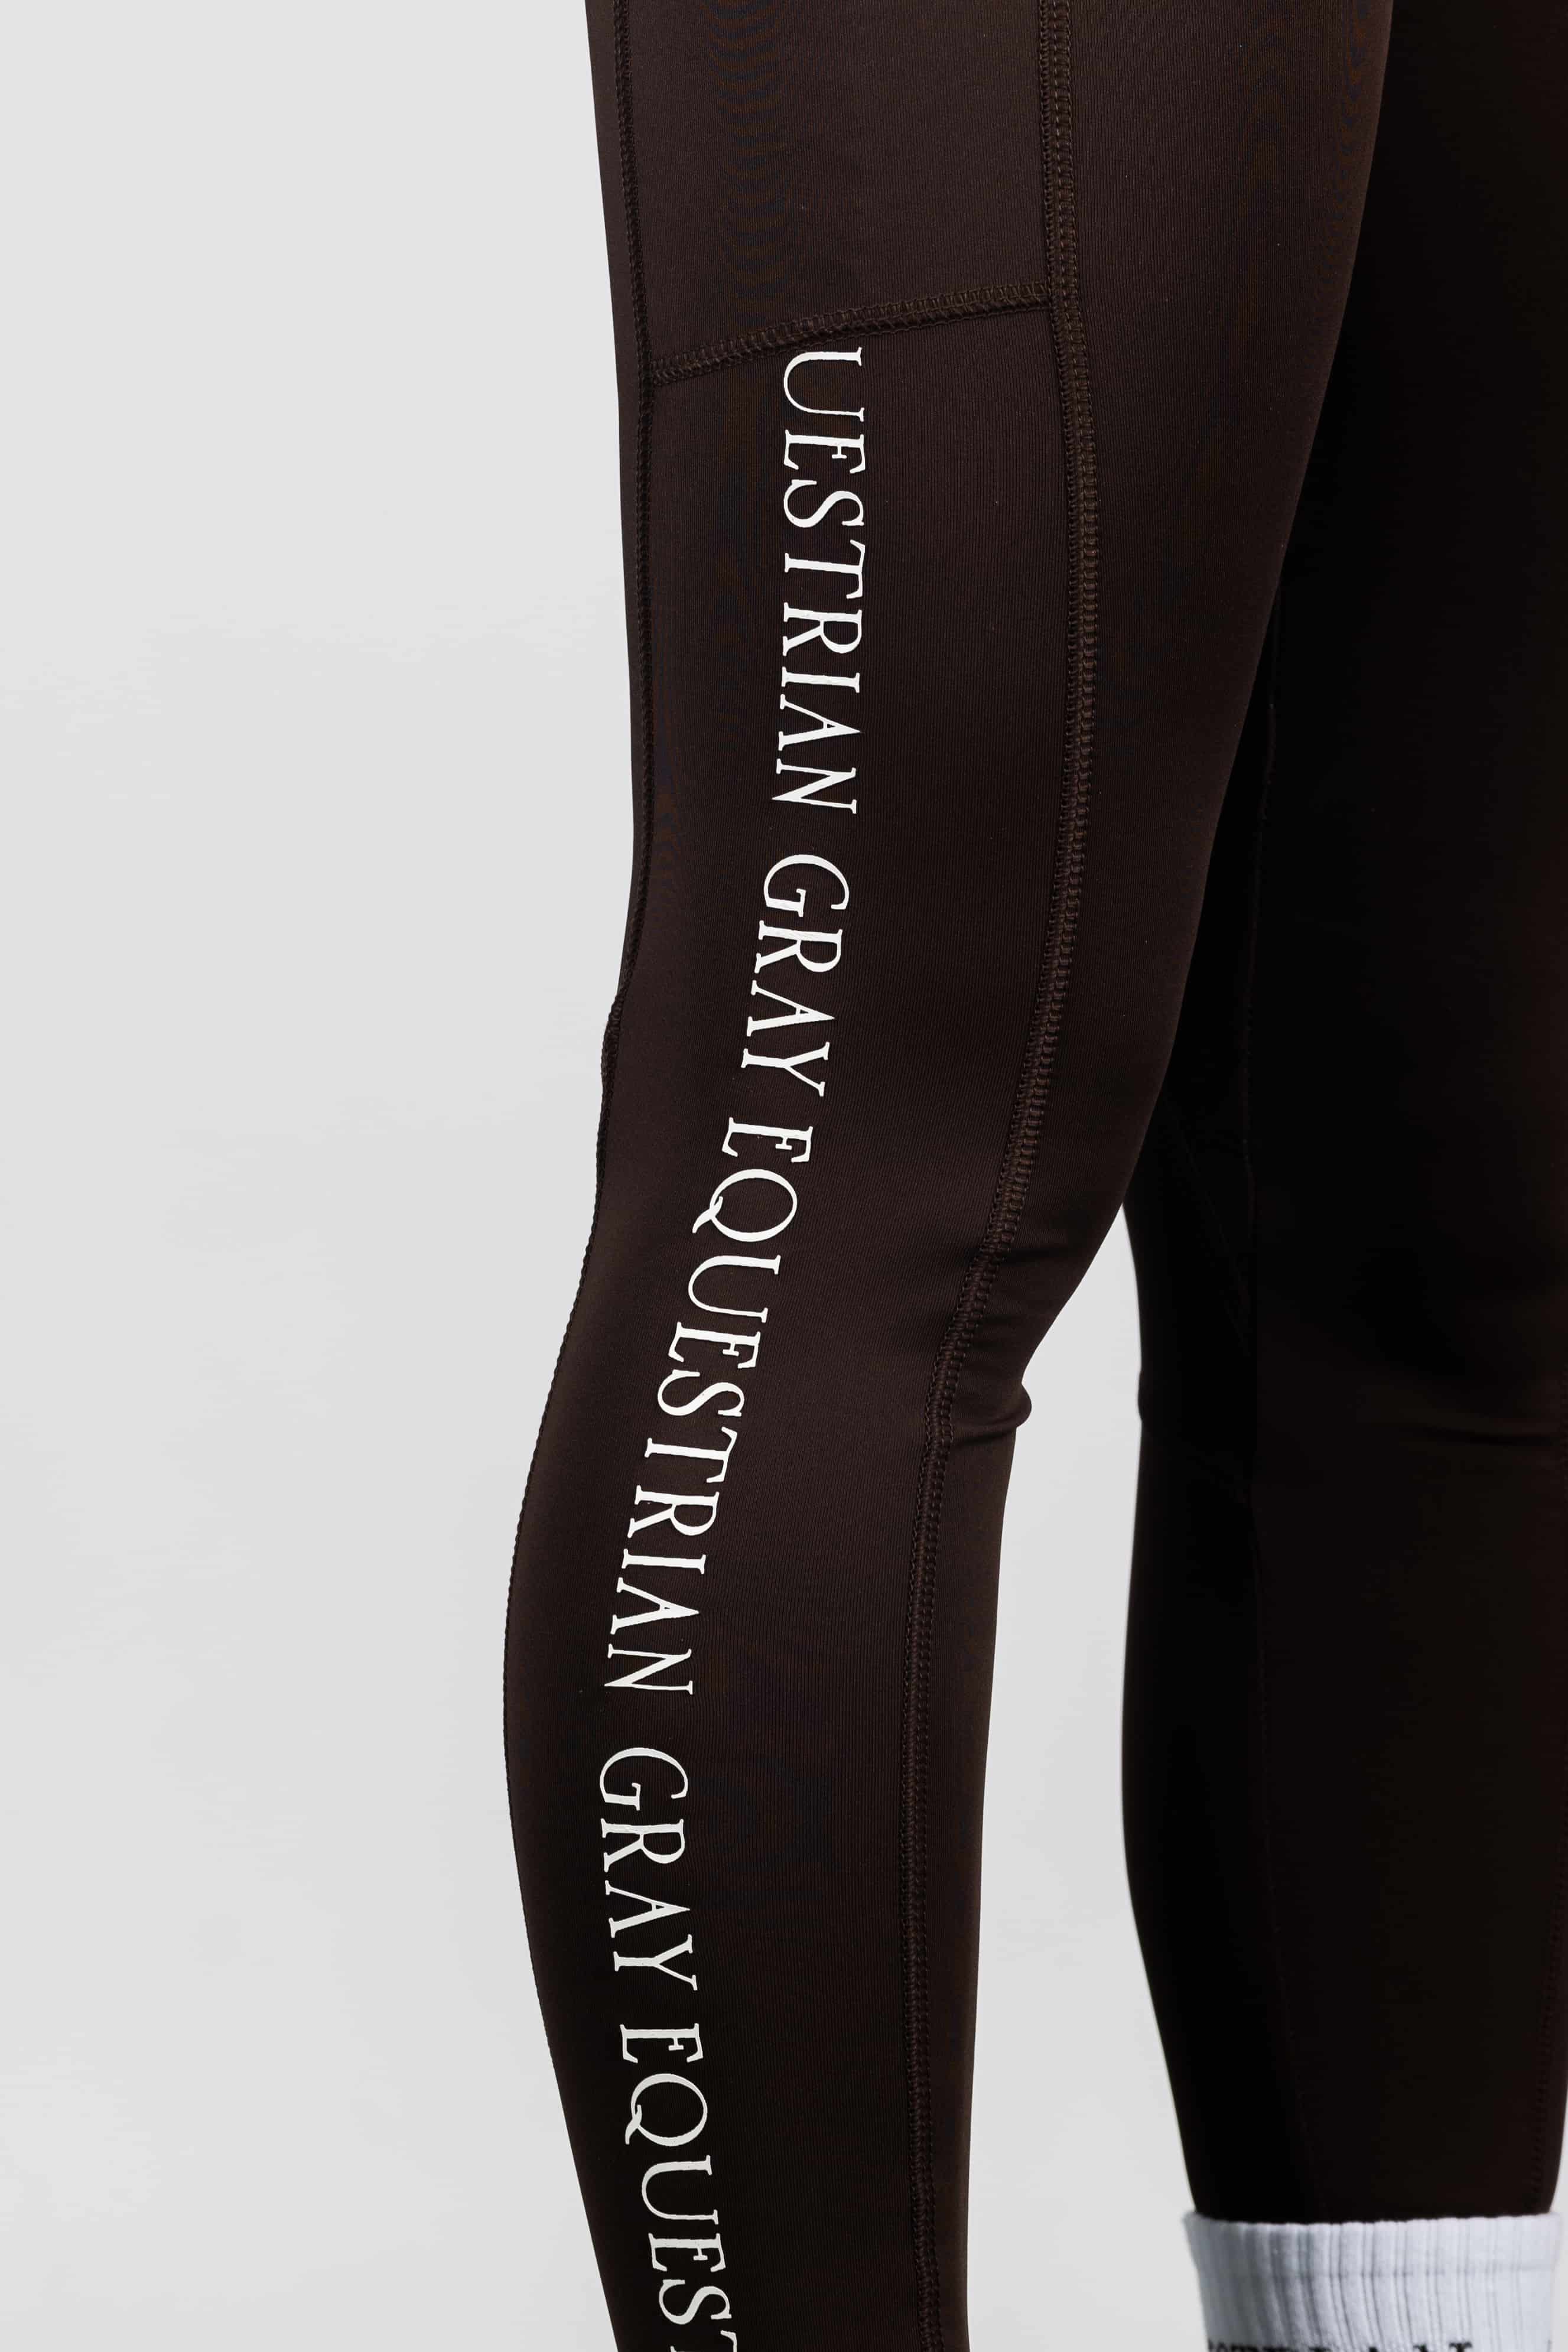 A close up of the white Grey Equestrian branding down the side of our leggings.